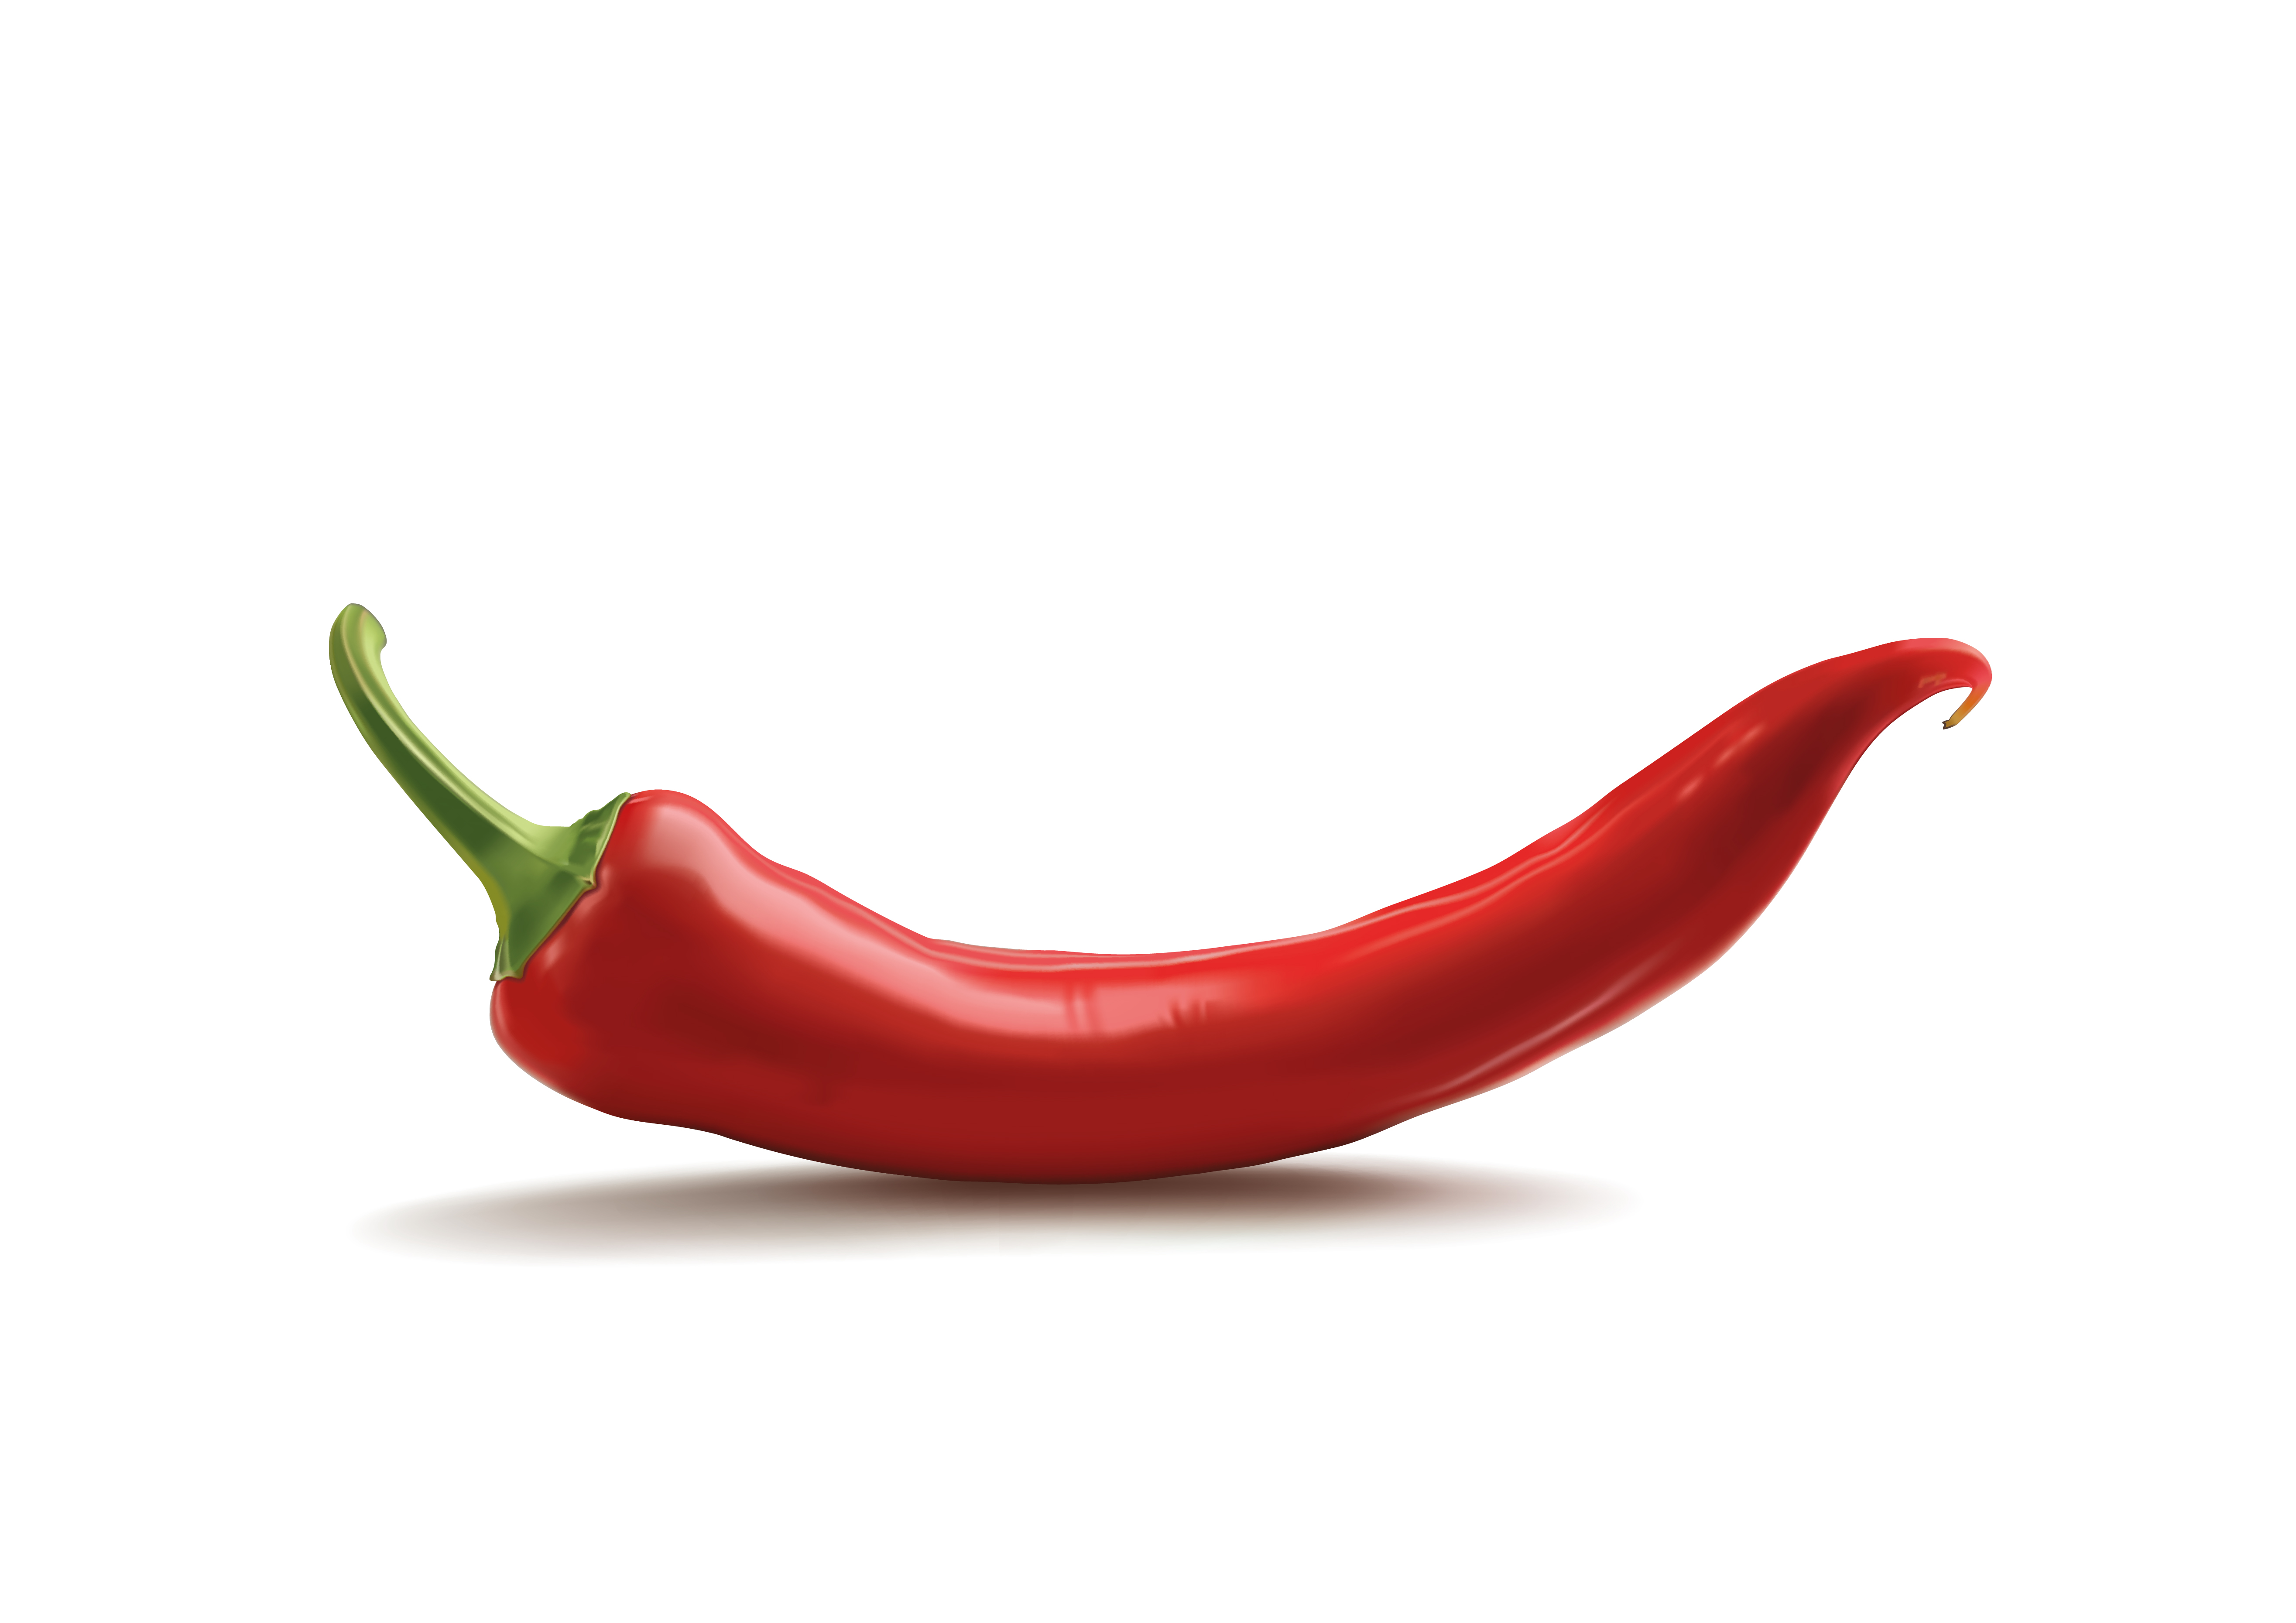 red hot chili pepper by Rubikmaster90 on Clipart library